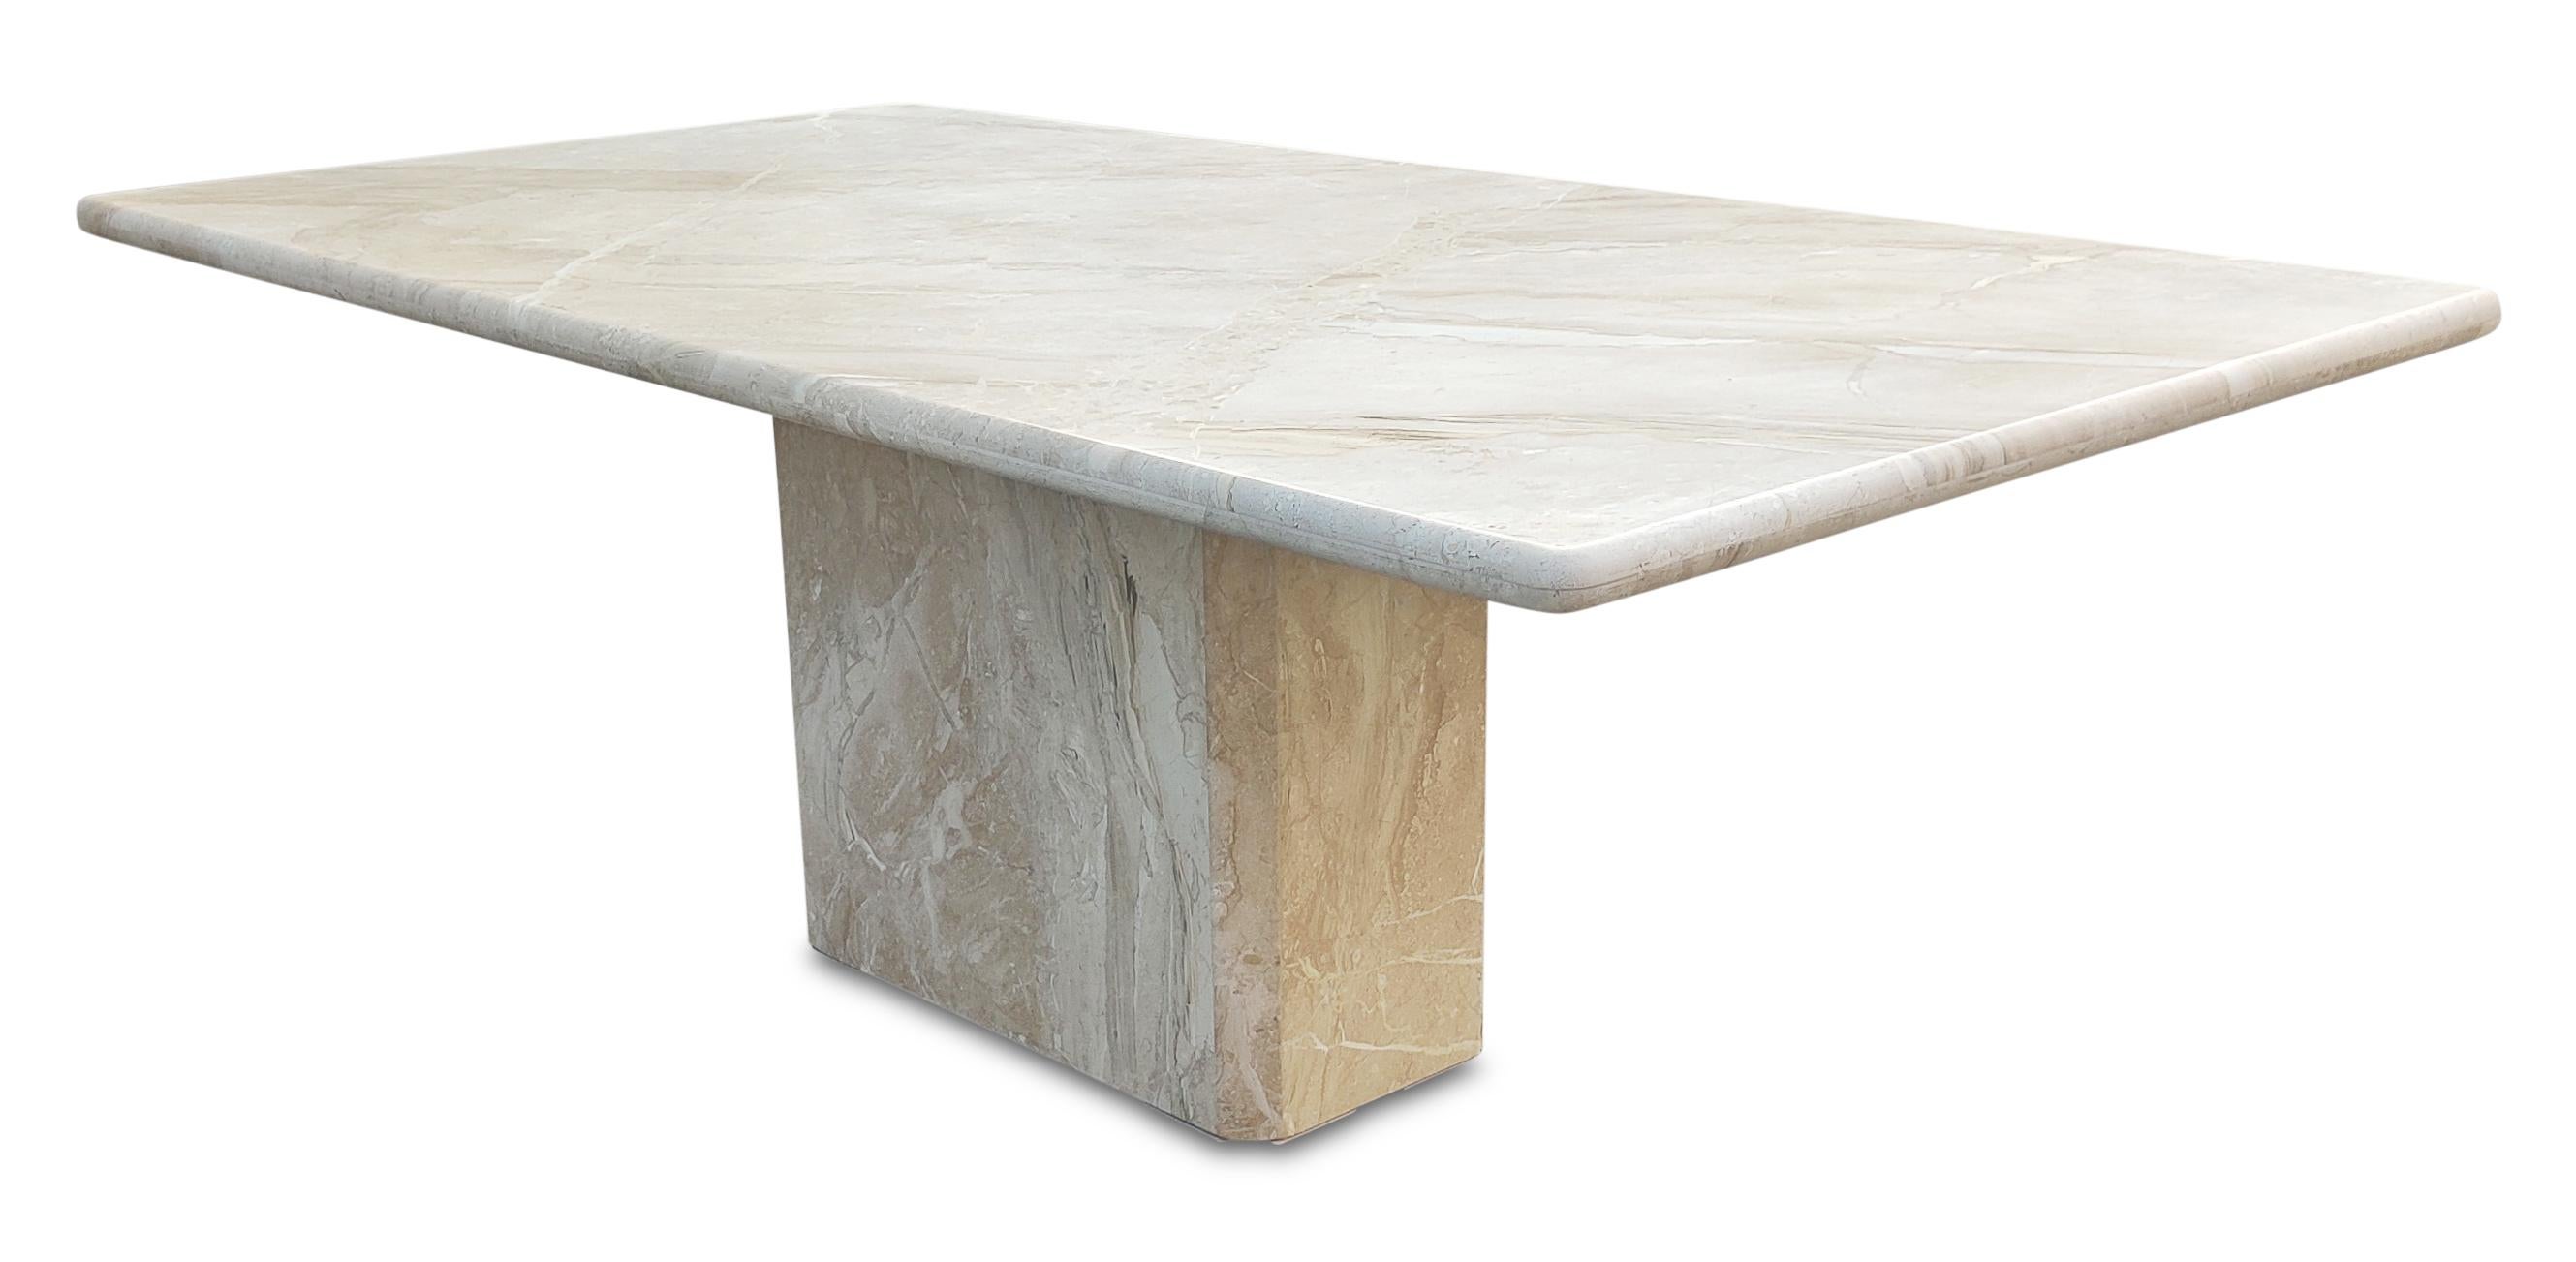 Italian Post-Modern Polished Beige or Cream Large Marble Pedestal Dining Table 1